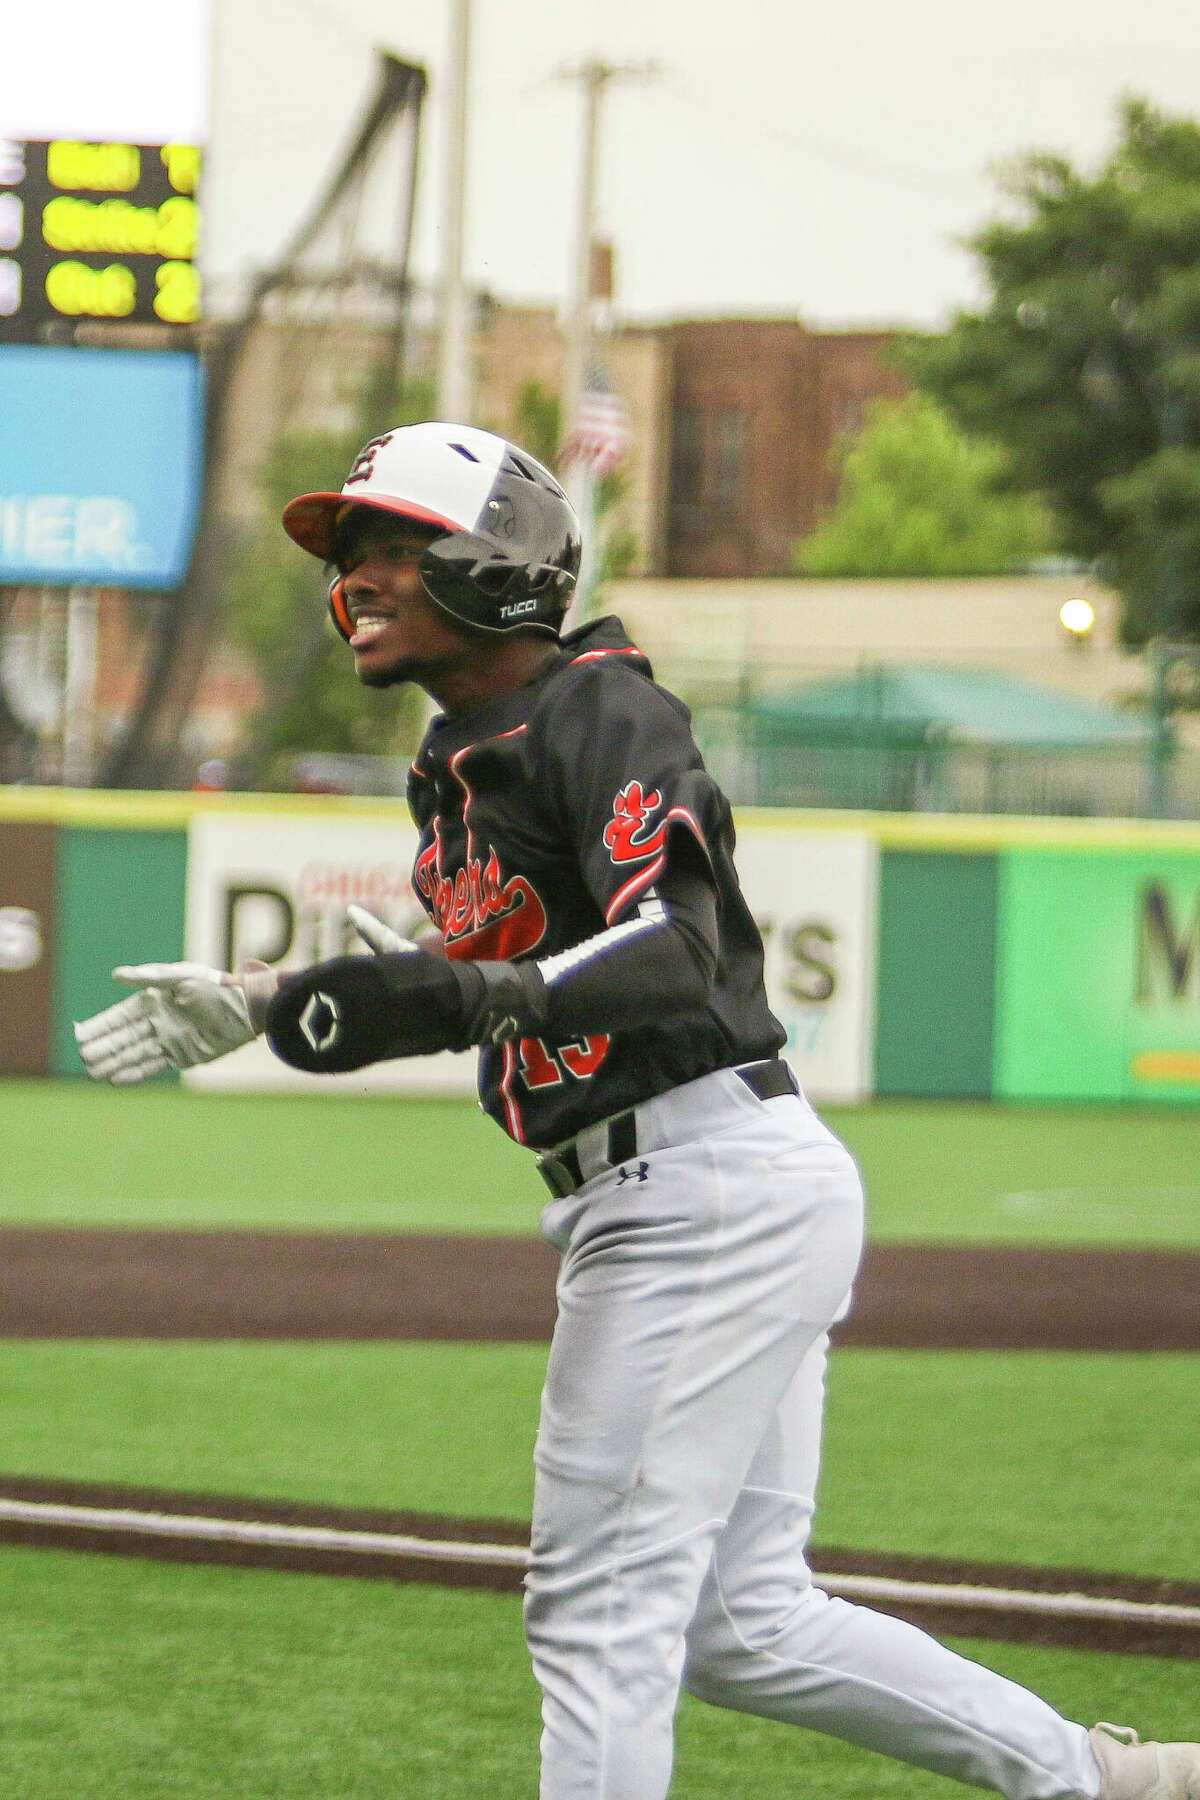 Montrez West stole home to give the Tigers their first lead of the day en route to a 7-4 win in the Class 4A state semifinal game on Friday at Duly Health & Care Field in Joliet.